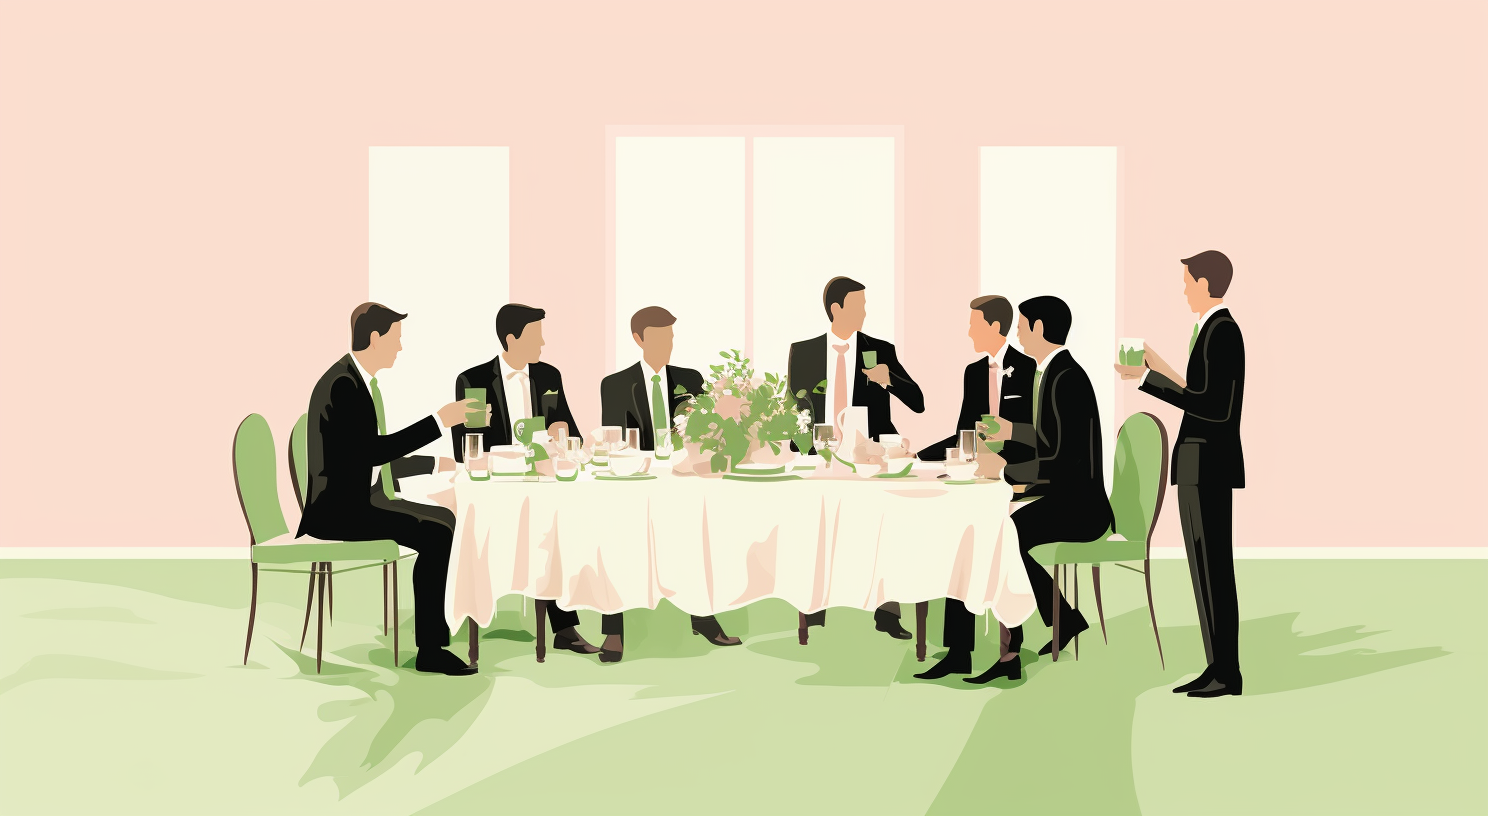 Groomsmen sitting at a table at a wedding reception